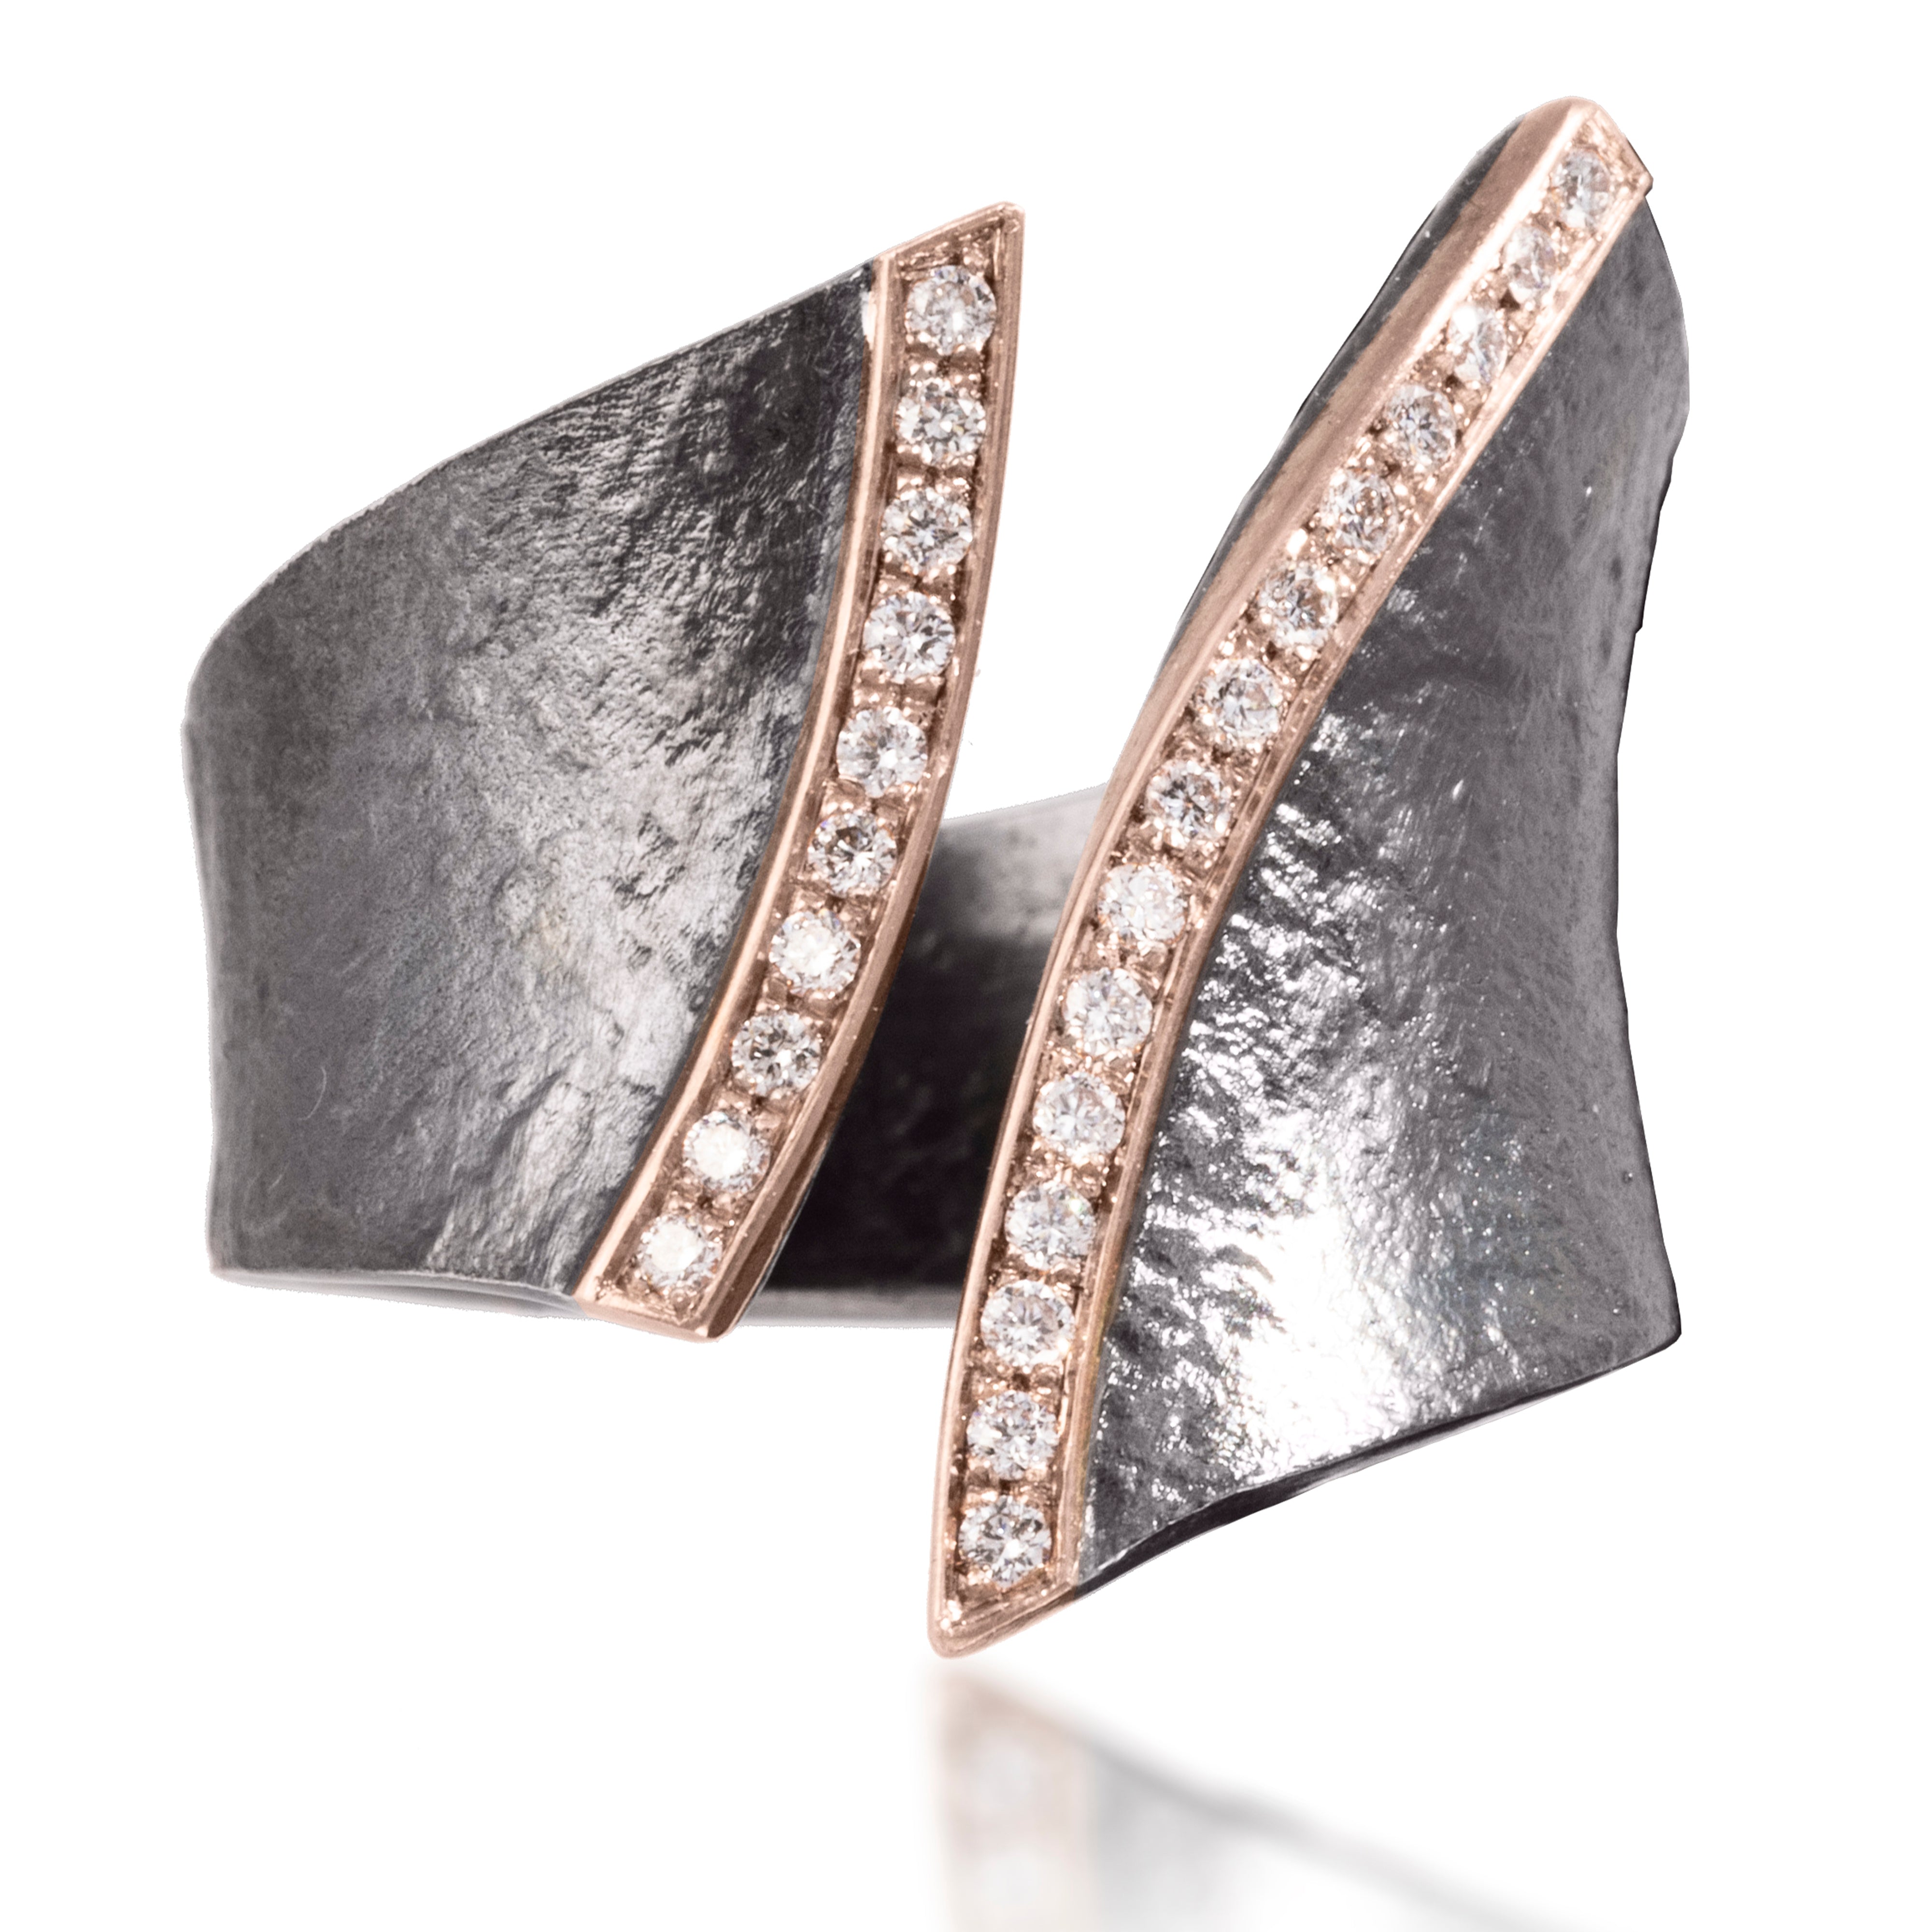 A fresh, modern classic combining earthy textured metals with true bright cut pavé. Hand forged and fabricated in 18k rose gold and oxidized sterling silver with pavé set white diamonds. As shown, 0.166 tcw. | Elizabeth Garvin Fine